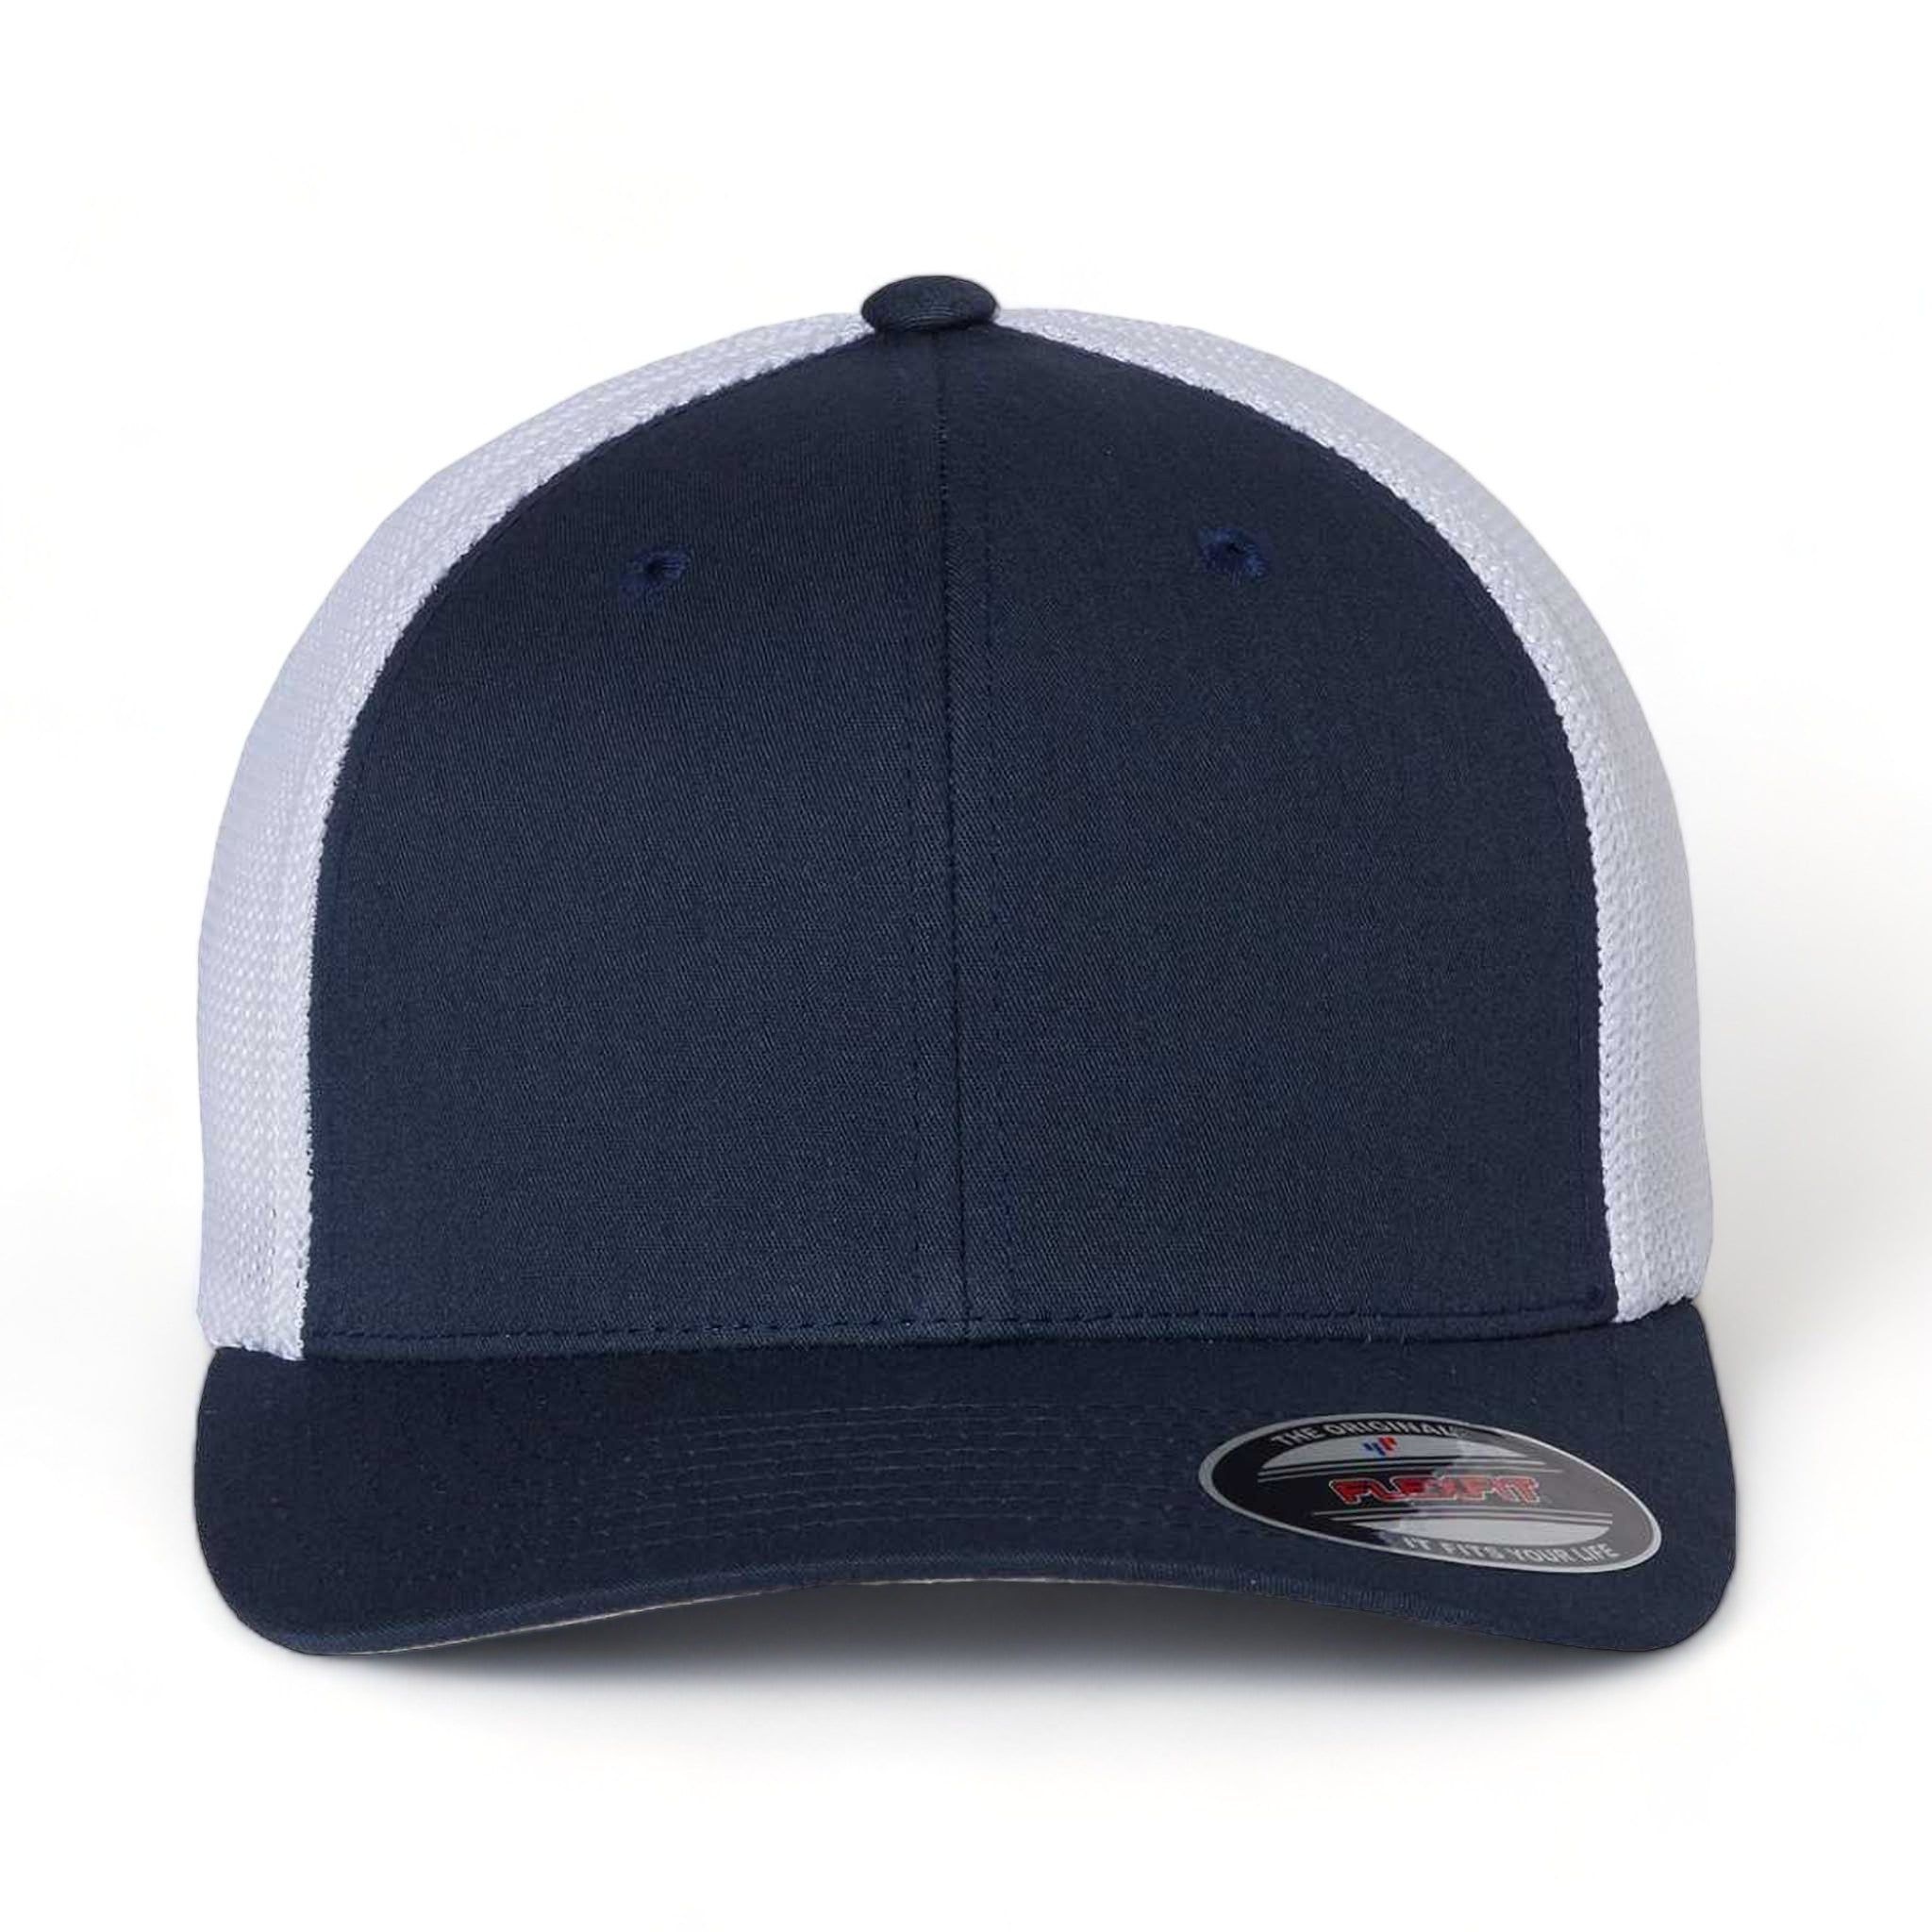 Front view of Flexfit 6511 custom hat in navy and white